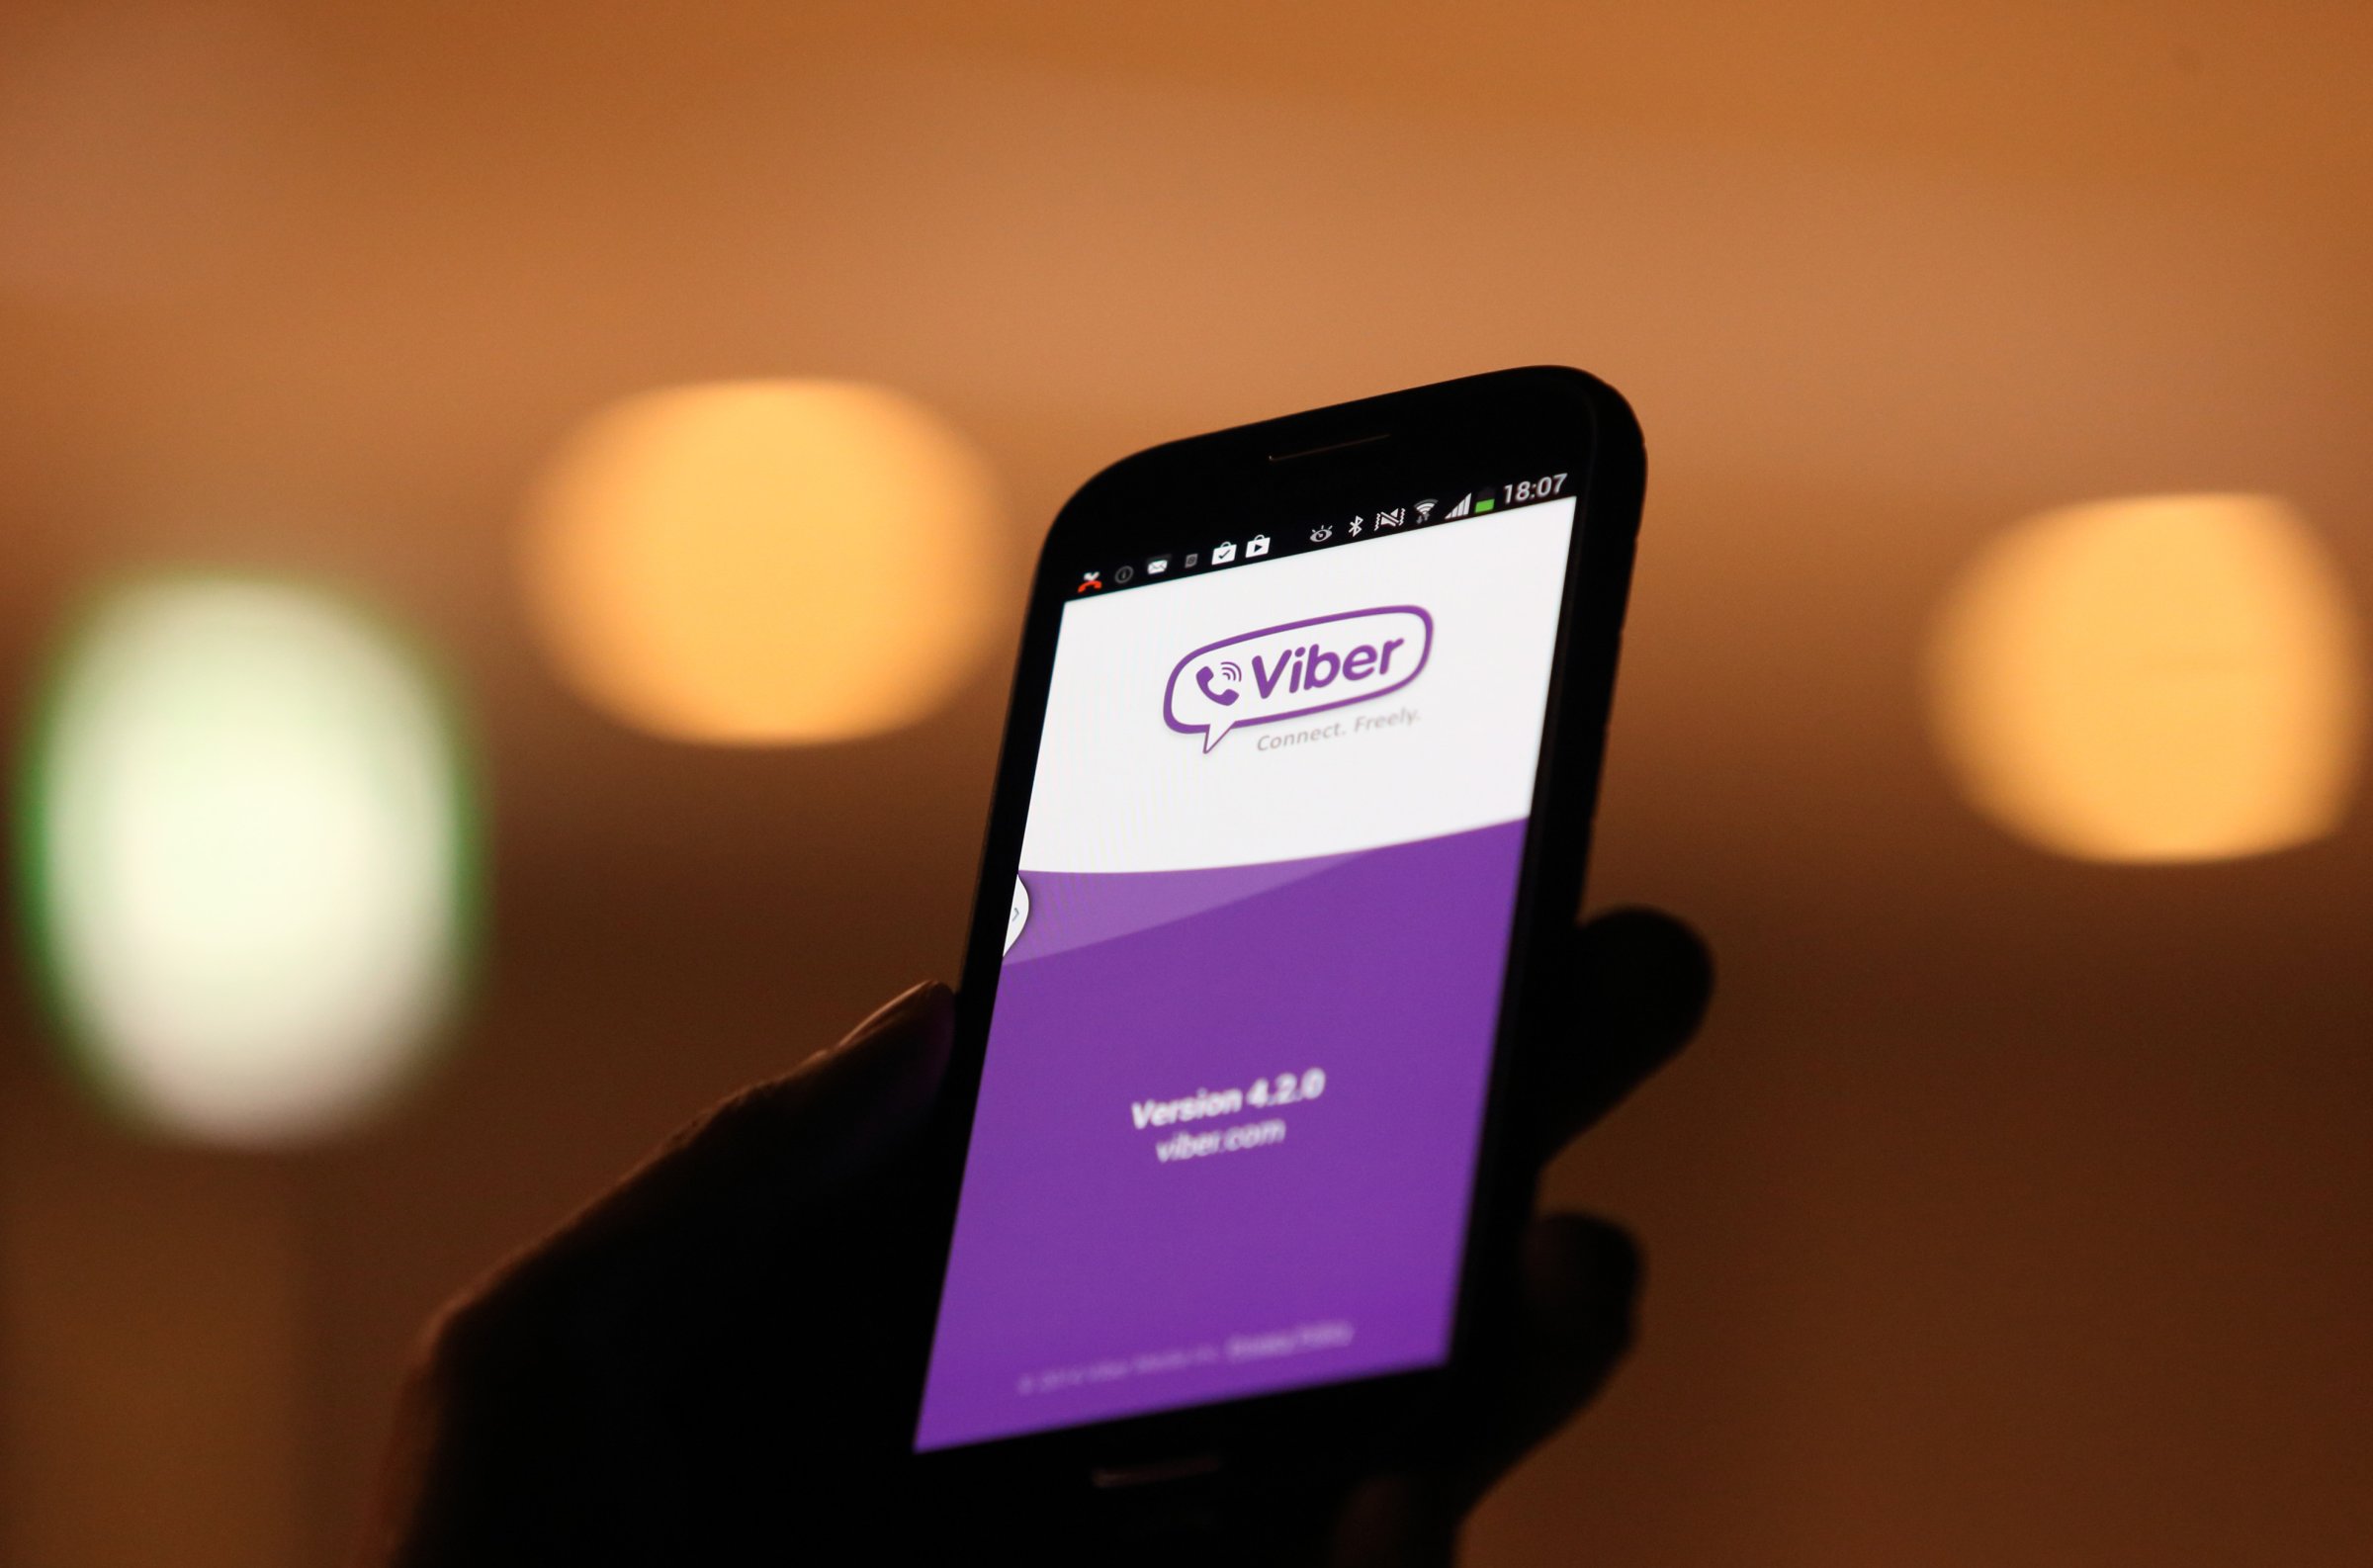 The Viber Internet messaging and calling service application is displayed on a smartphone in this arranged photograph taken in Tokyo, Japan, on Friday, Feb. 14, 2014.